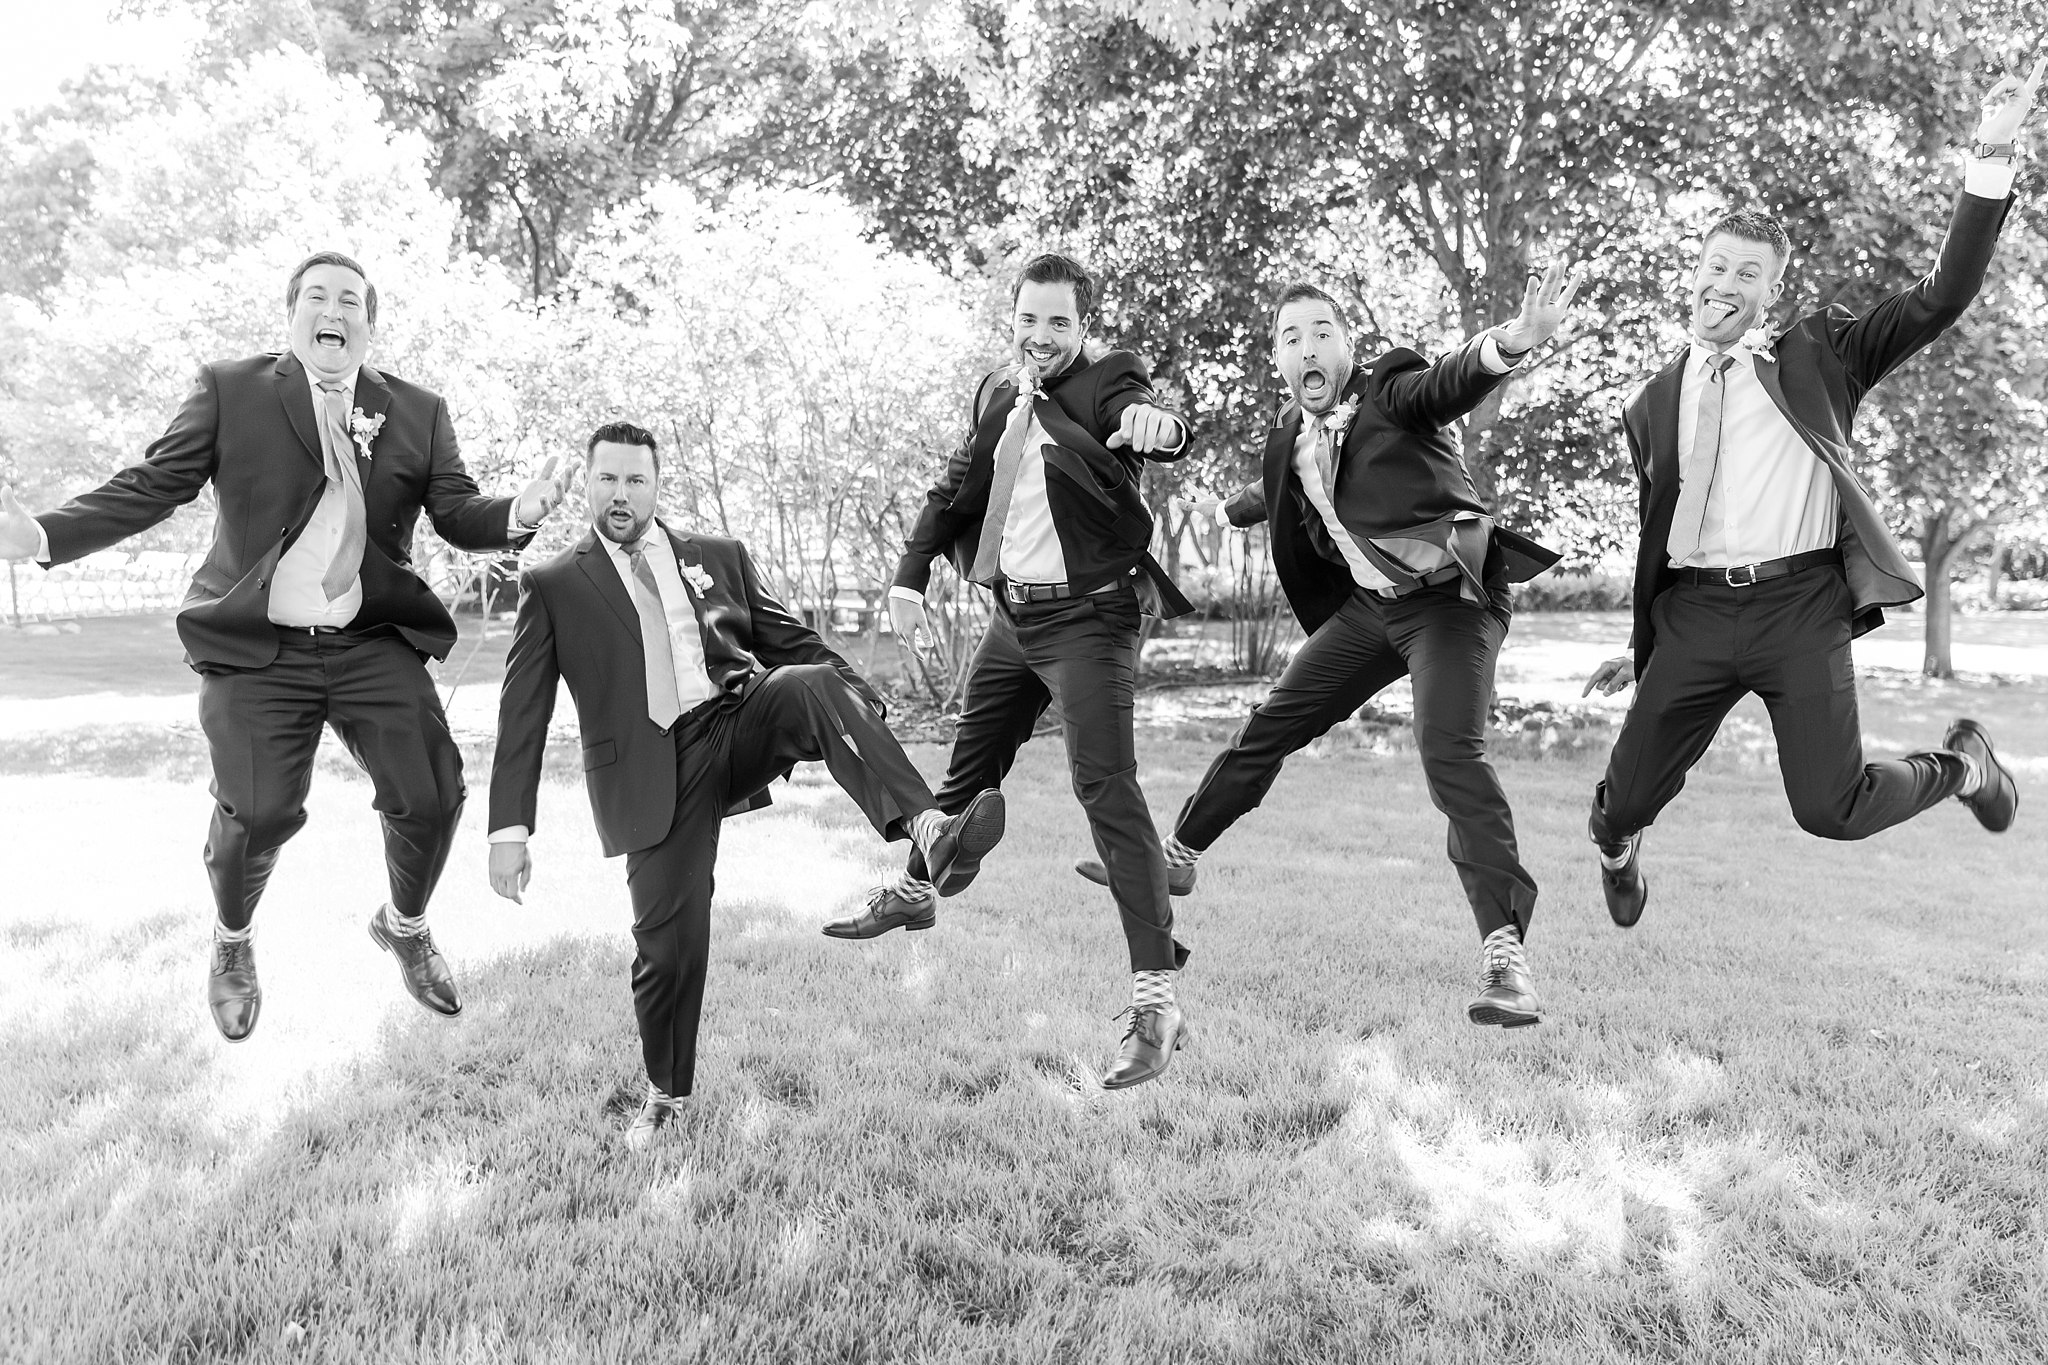 fun-candid-laid-back-wedding-photos-at-wellers-carriage-house-in-saline-michigan-and-at-the-eagle-crest-golf-resort-by-courtney-carolyn-photography_0036.jpg